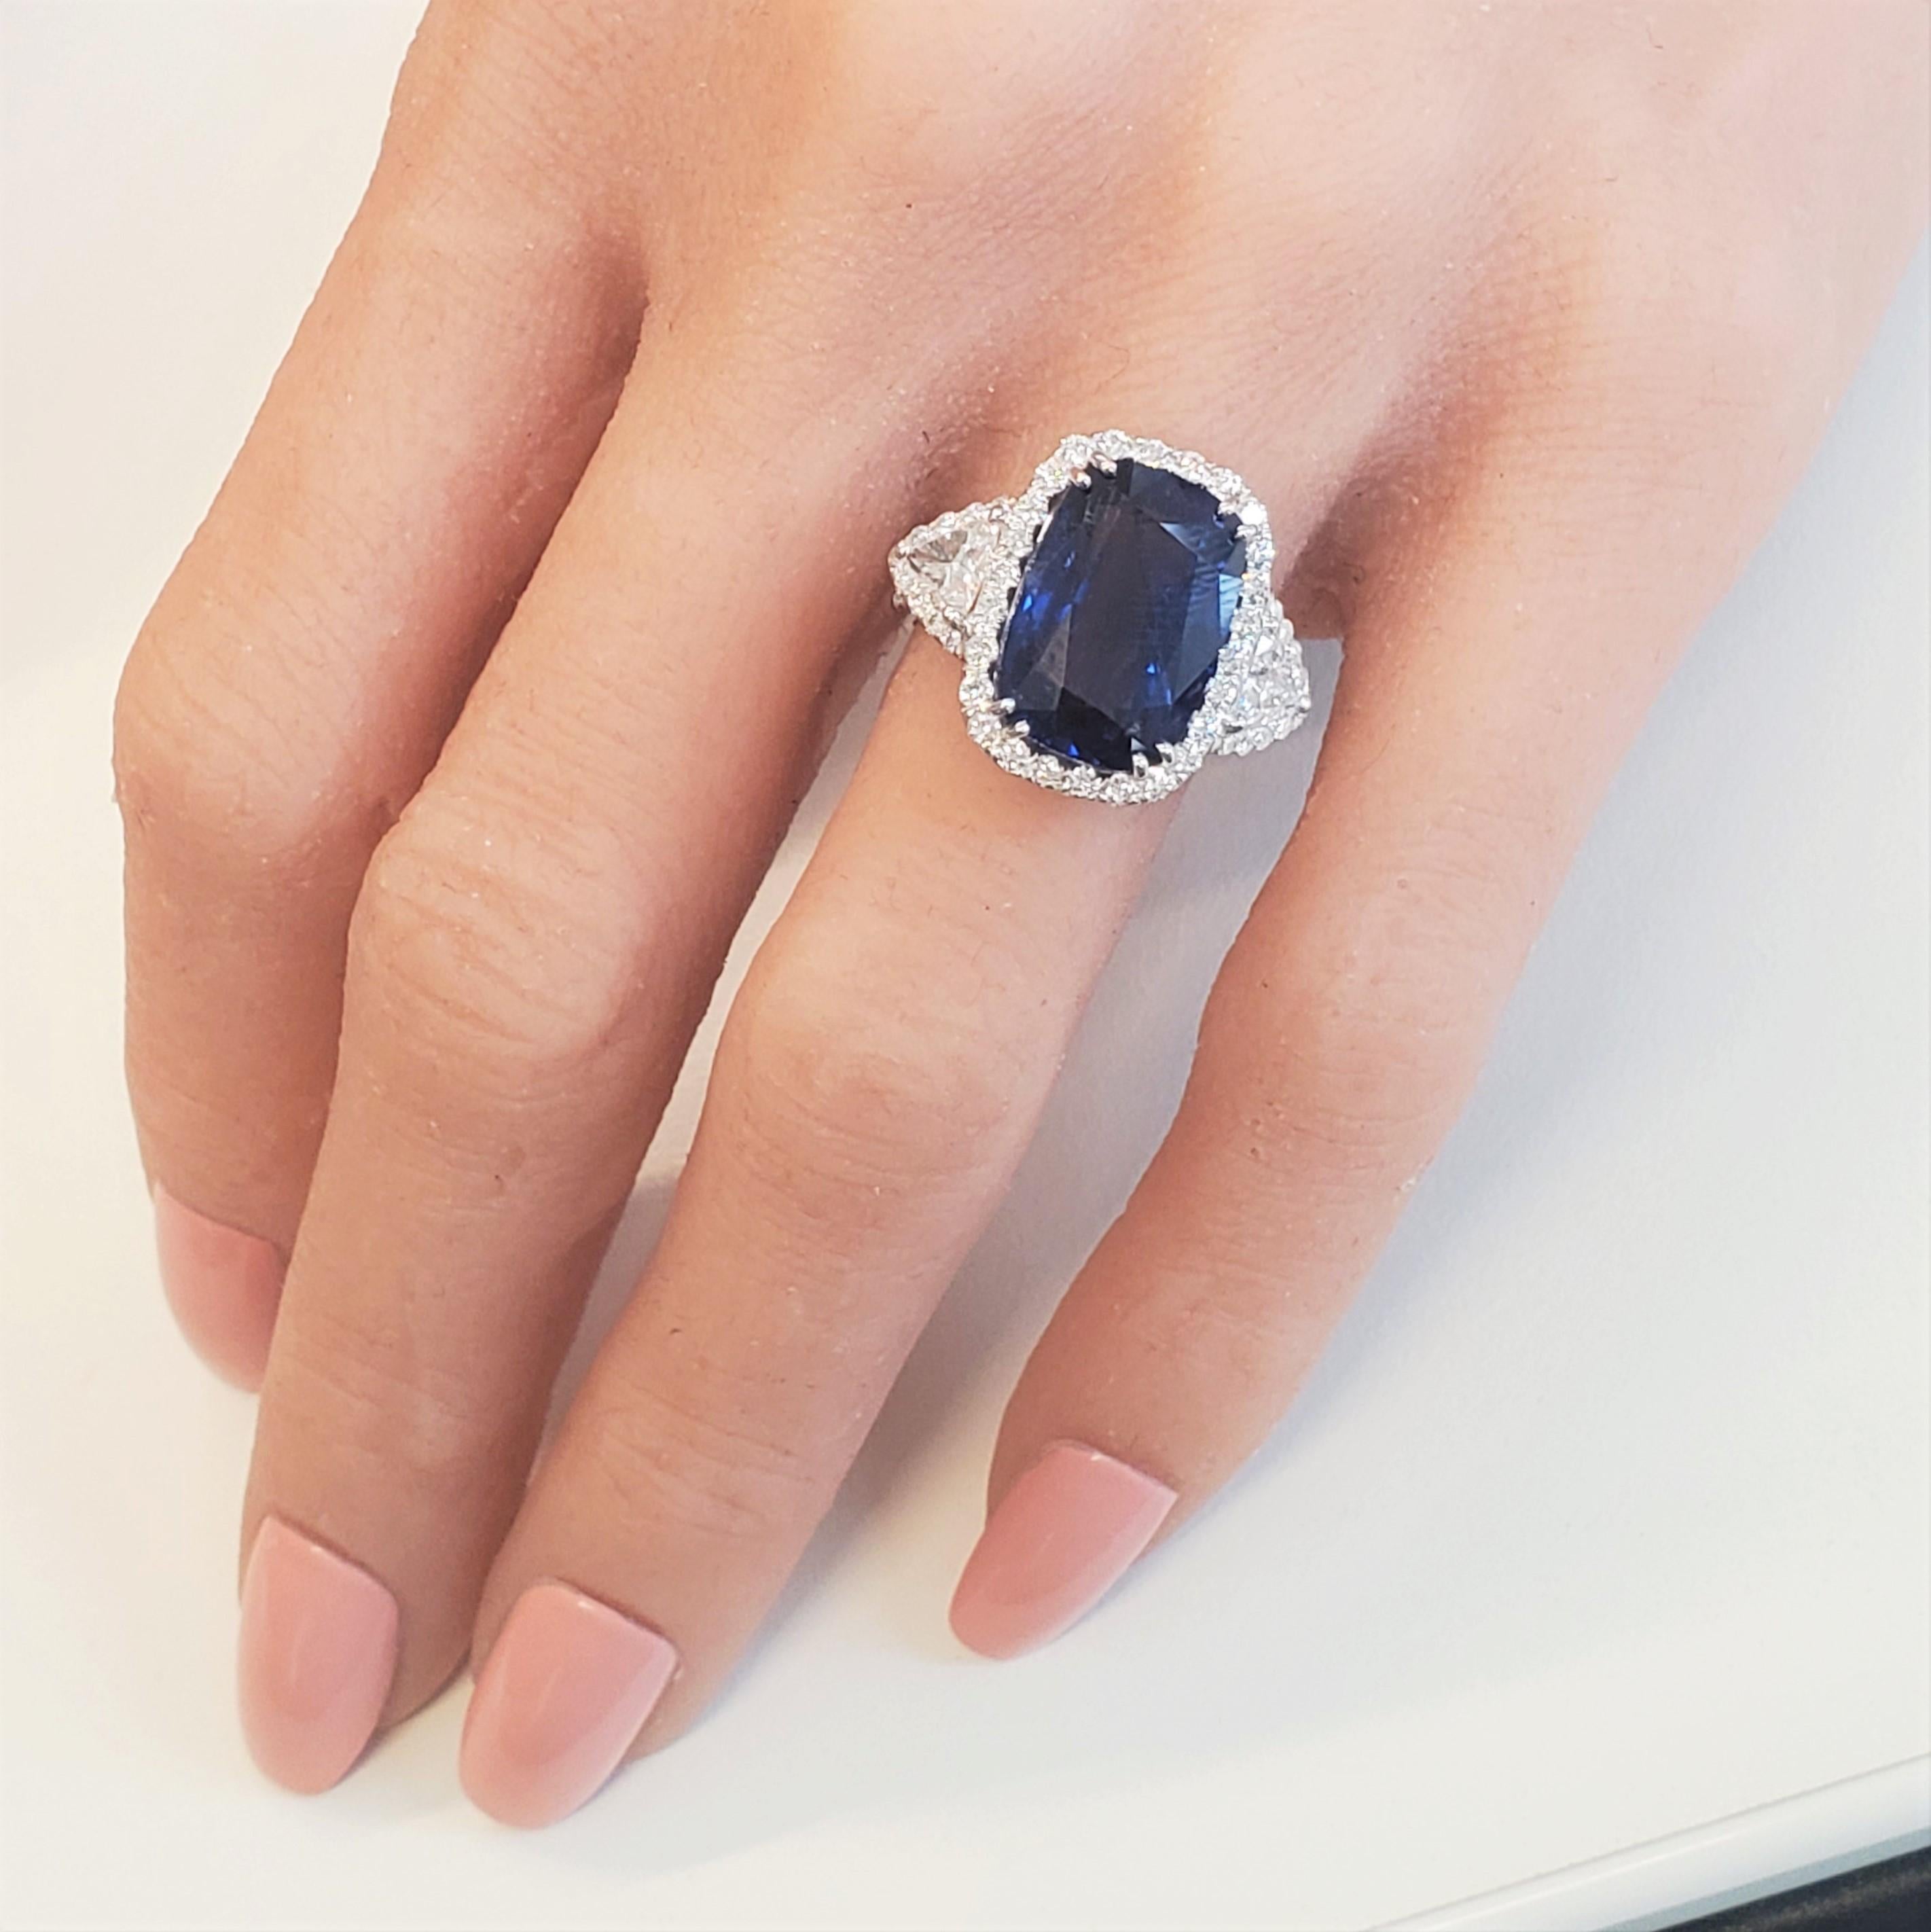 This show-stopping 18k white gold cocktail ring is the ultimate selection for your next anniversary, wedding, or engagement occasion. One cushion cut, fine quality intense blue sapphire is prong set in the center with a weight of 10.11 carats. The